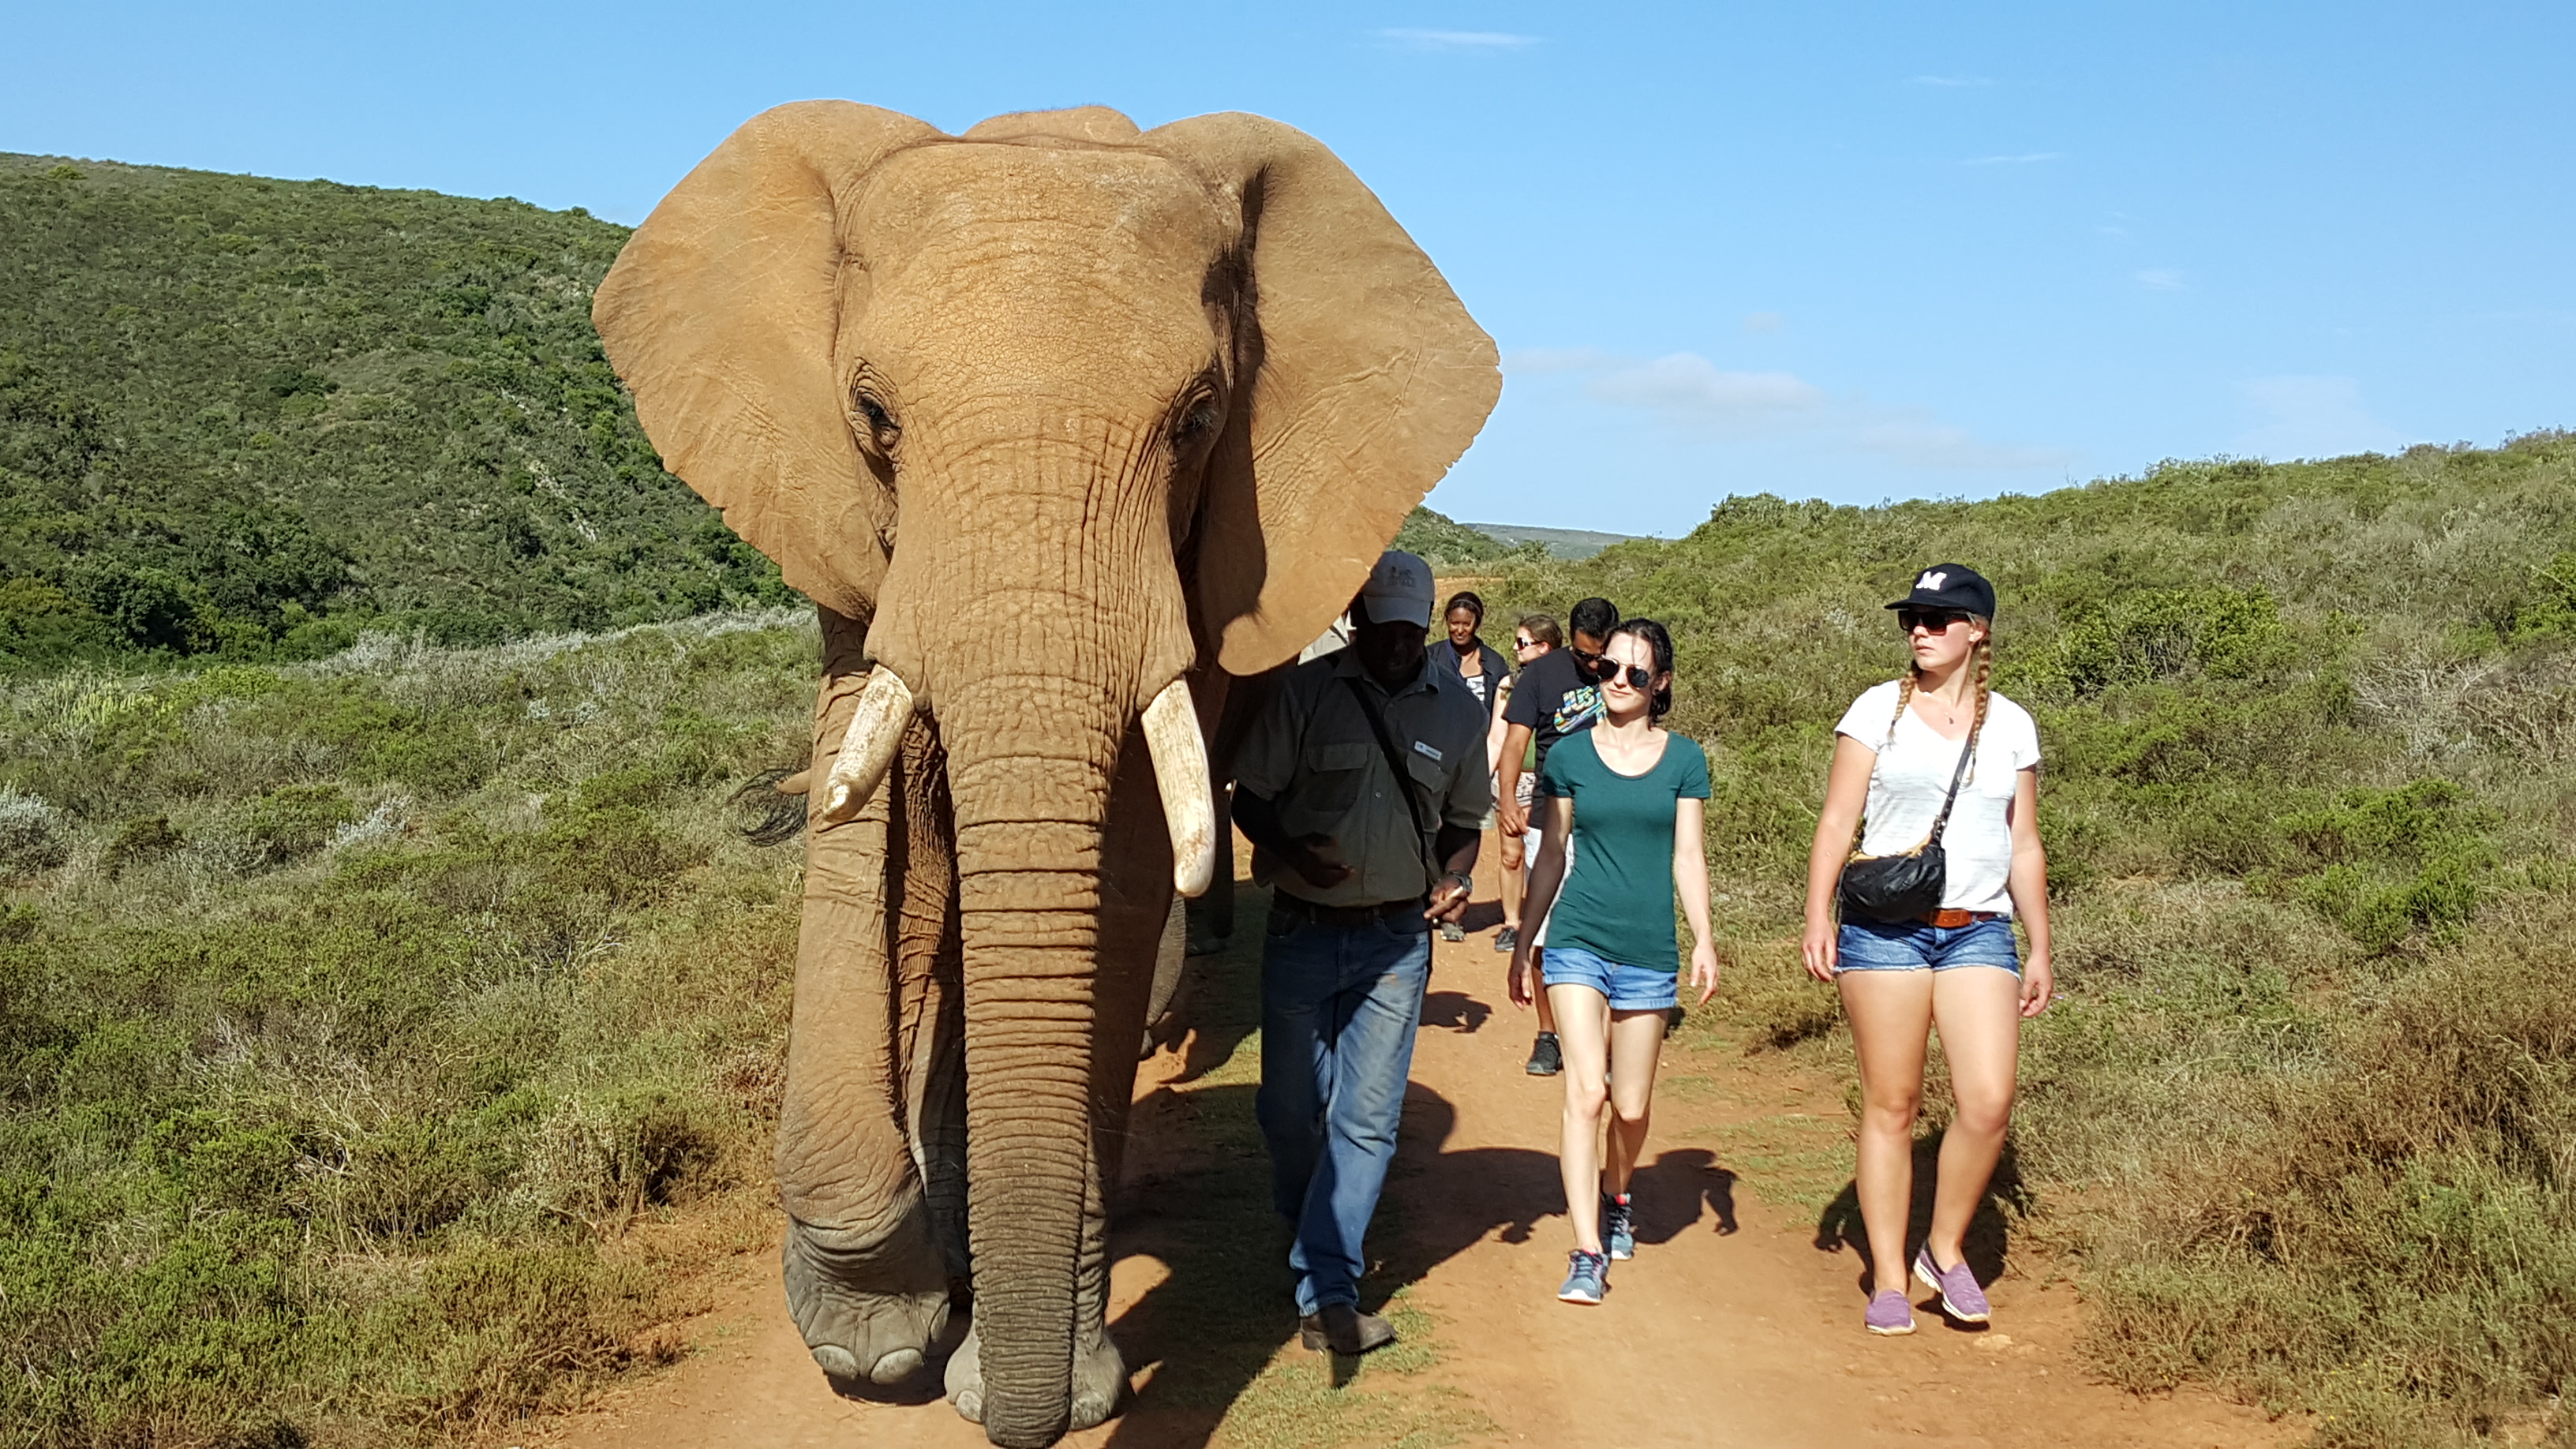 Indalu Game Reserve - For Safari Game Drive and Elephant experience